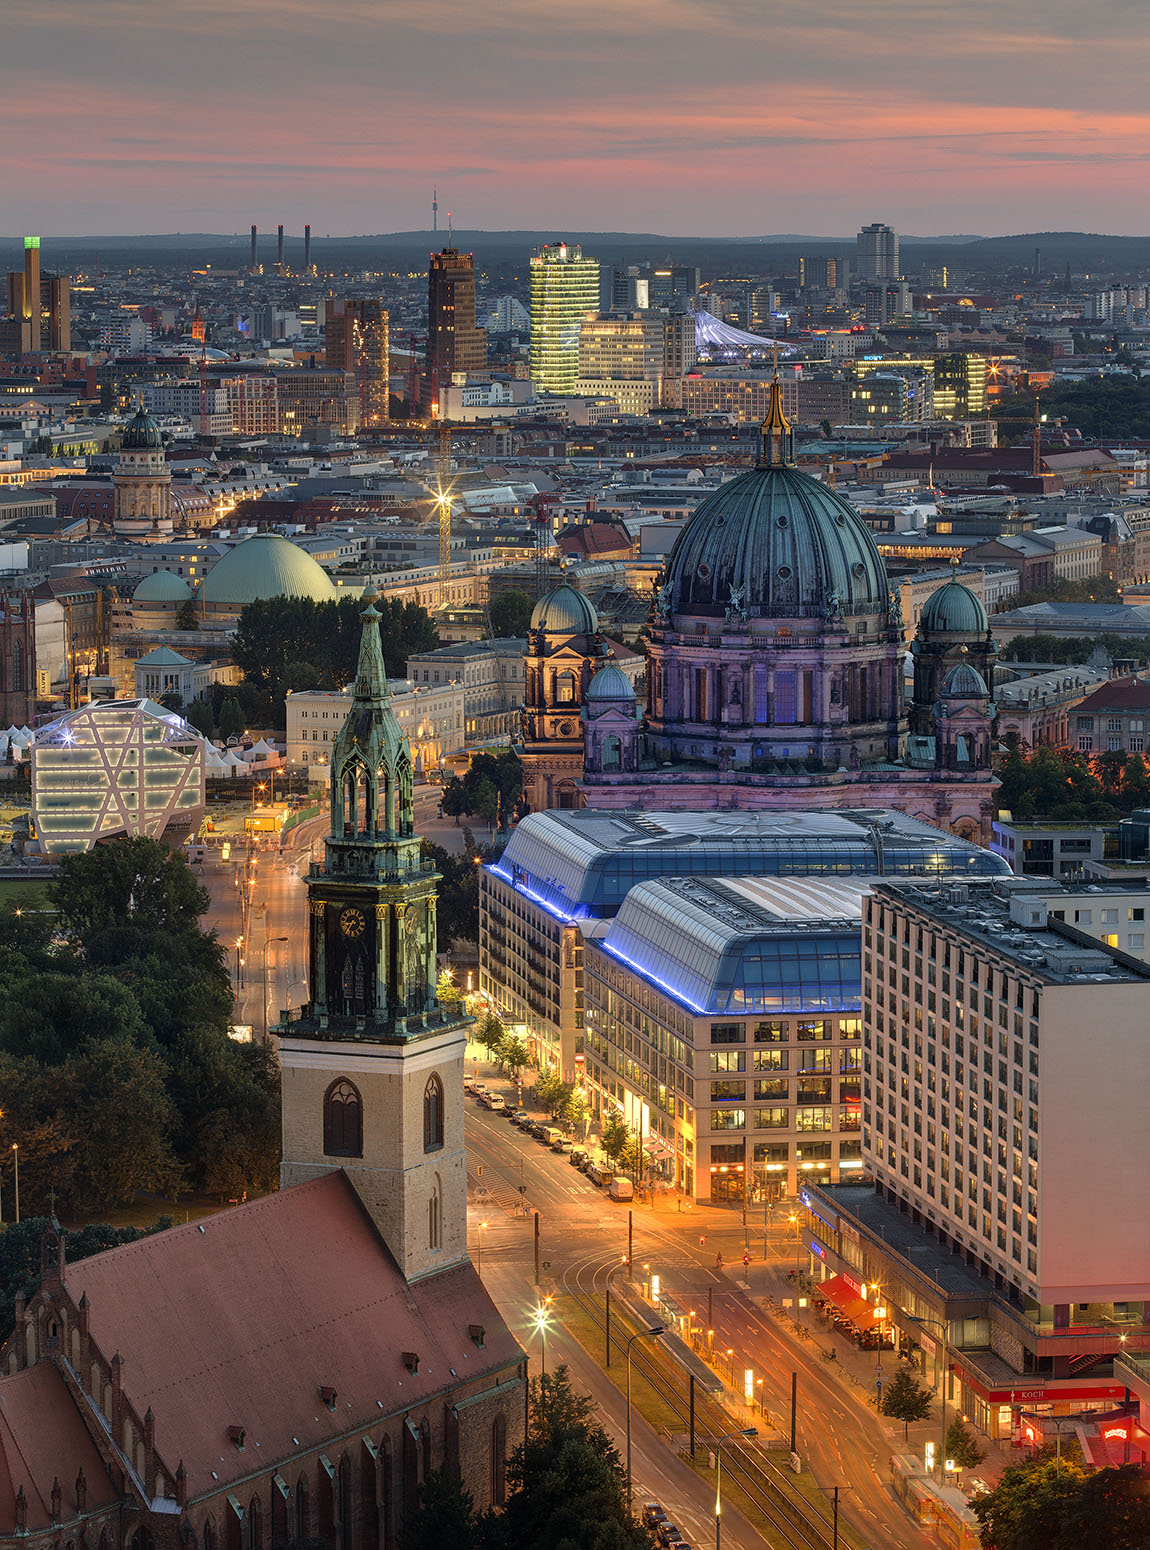 GREEN BERLIN – THE FUTURE OF TOURISM